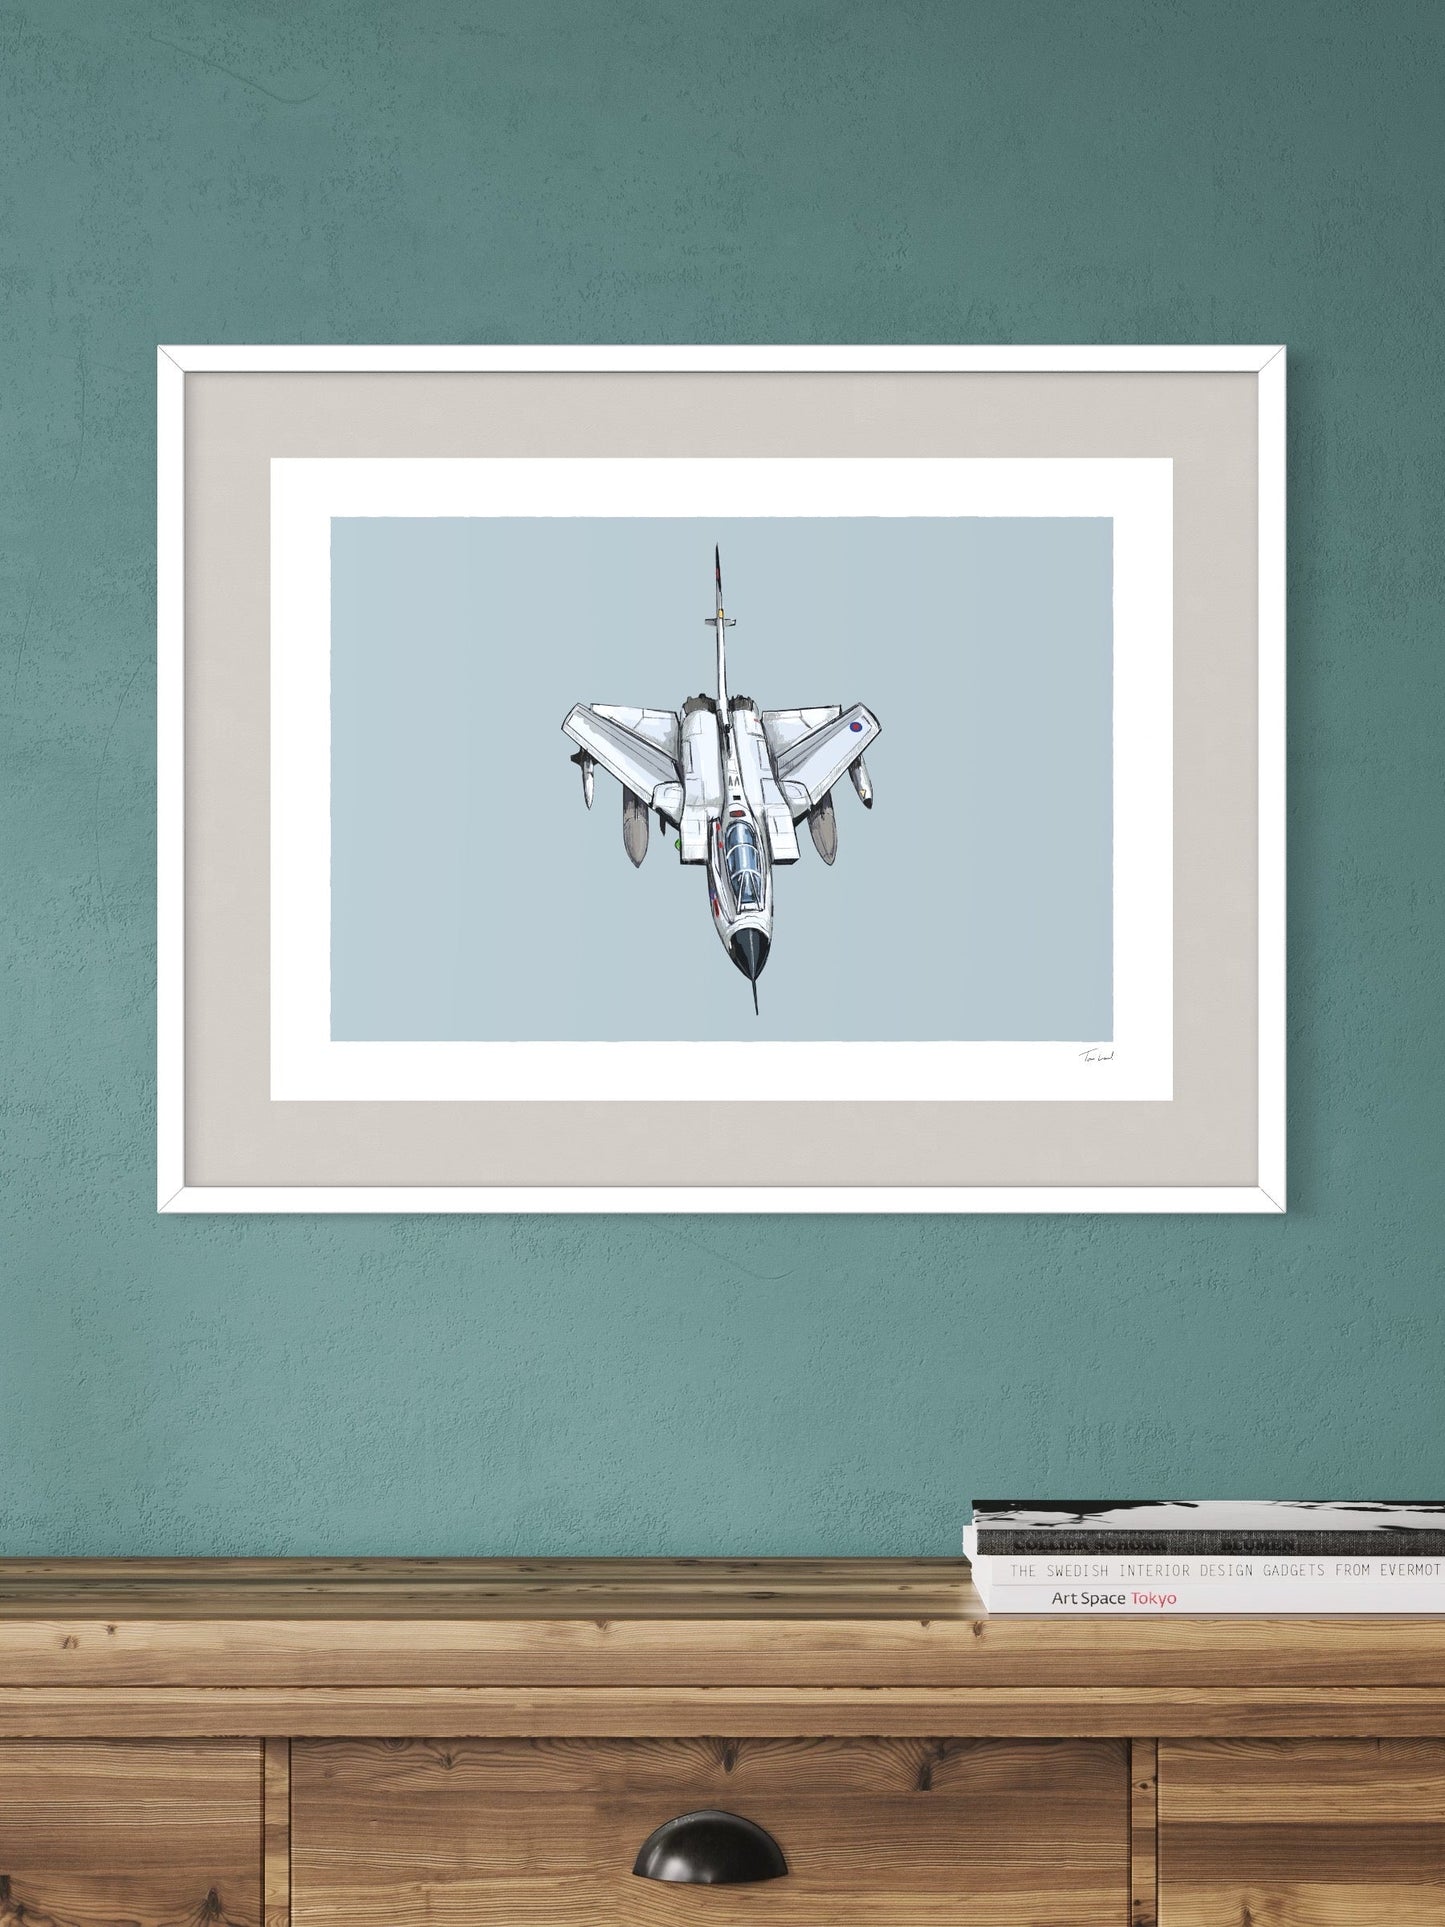 This image shows a giclee wall art print by Tom Laird Illustration of the British classic plane, the Tornado, framed in a beautiful living room with tasteful modern home decor. This art print is available from Tom Laird Illustration in a variety of sizes.